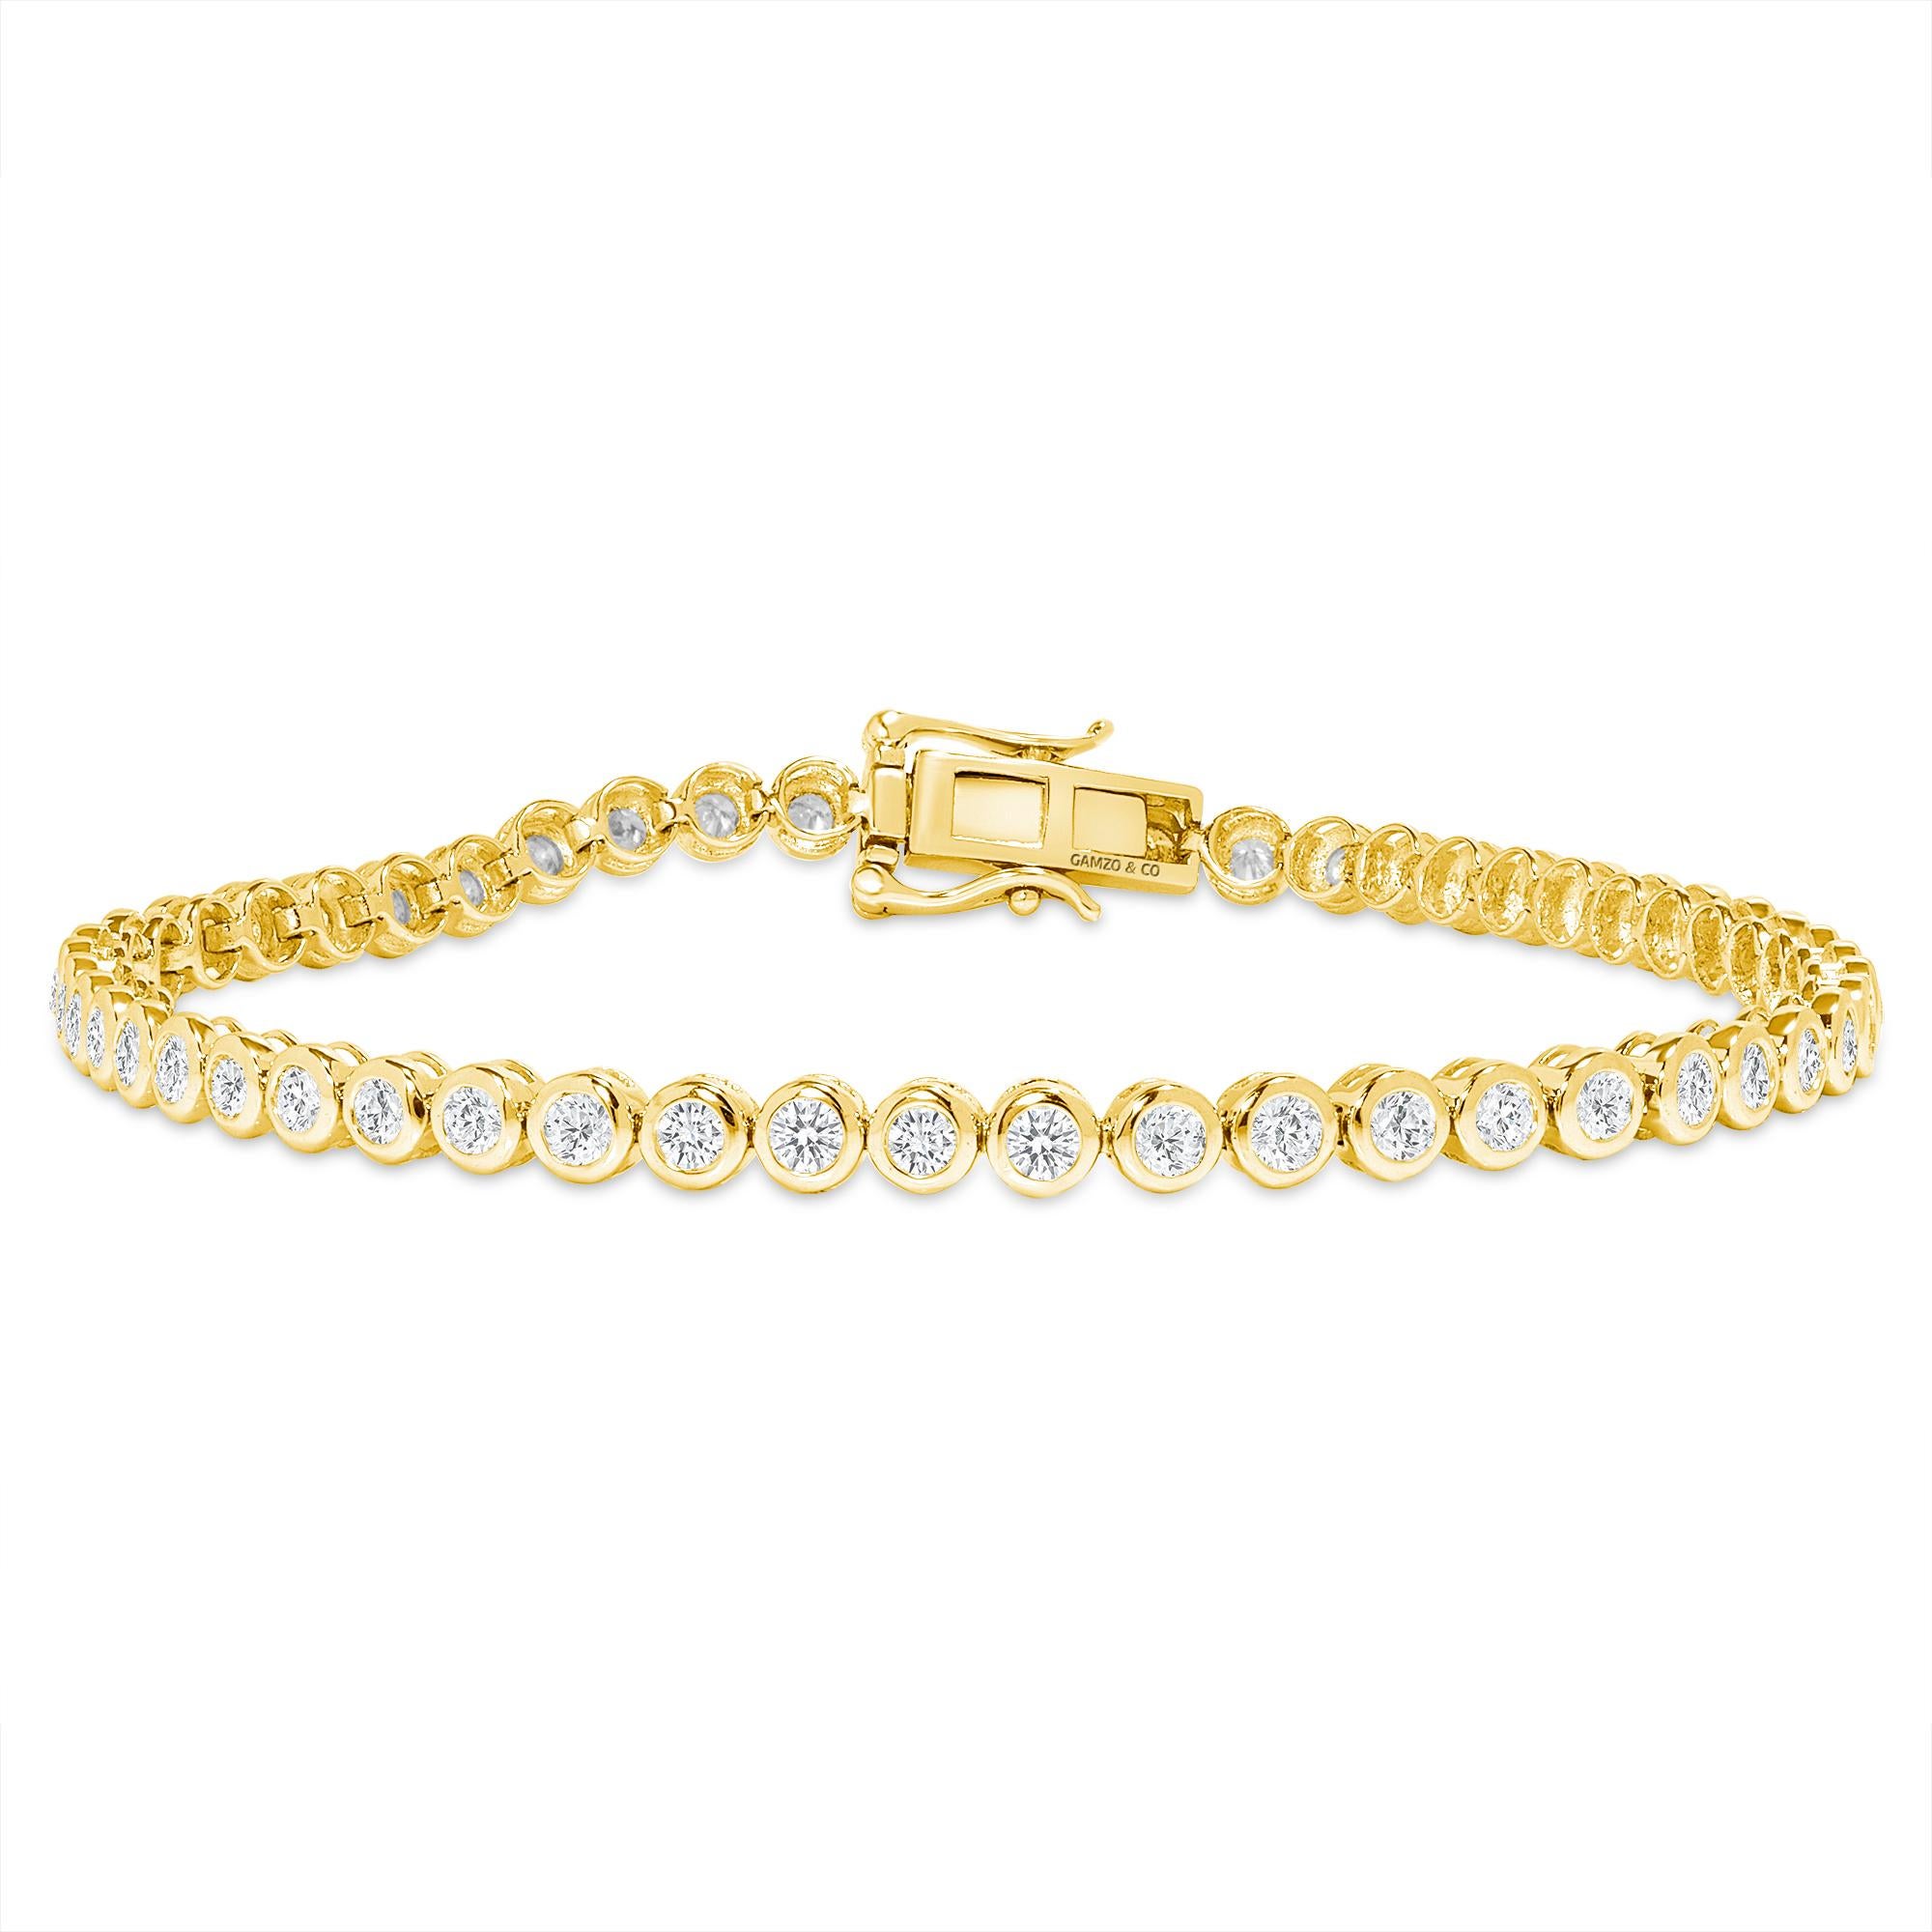 These beautiful round diamonds dance around your wrist as they absorb light and attention.
Metal: 14k Gold
Diamond Cut: Round
Diamond Total Carats: 5ct
Diamond Clarity: VS
Diamond Color: F
Color: Yellow Gold
Bracelet Length: 7 Inches 
Included with